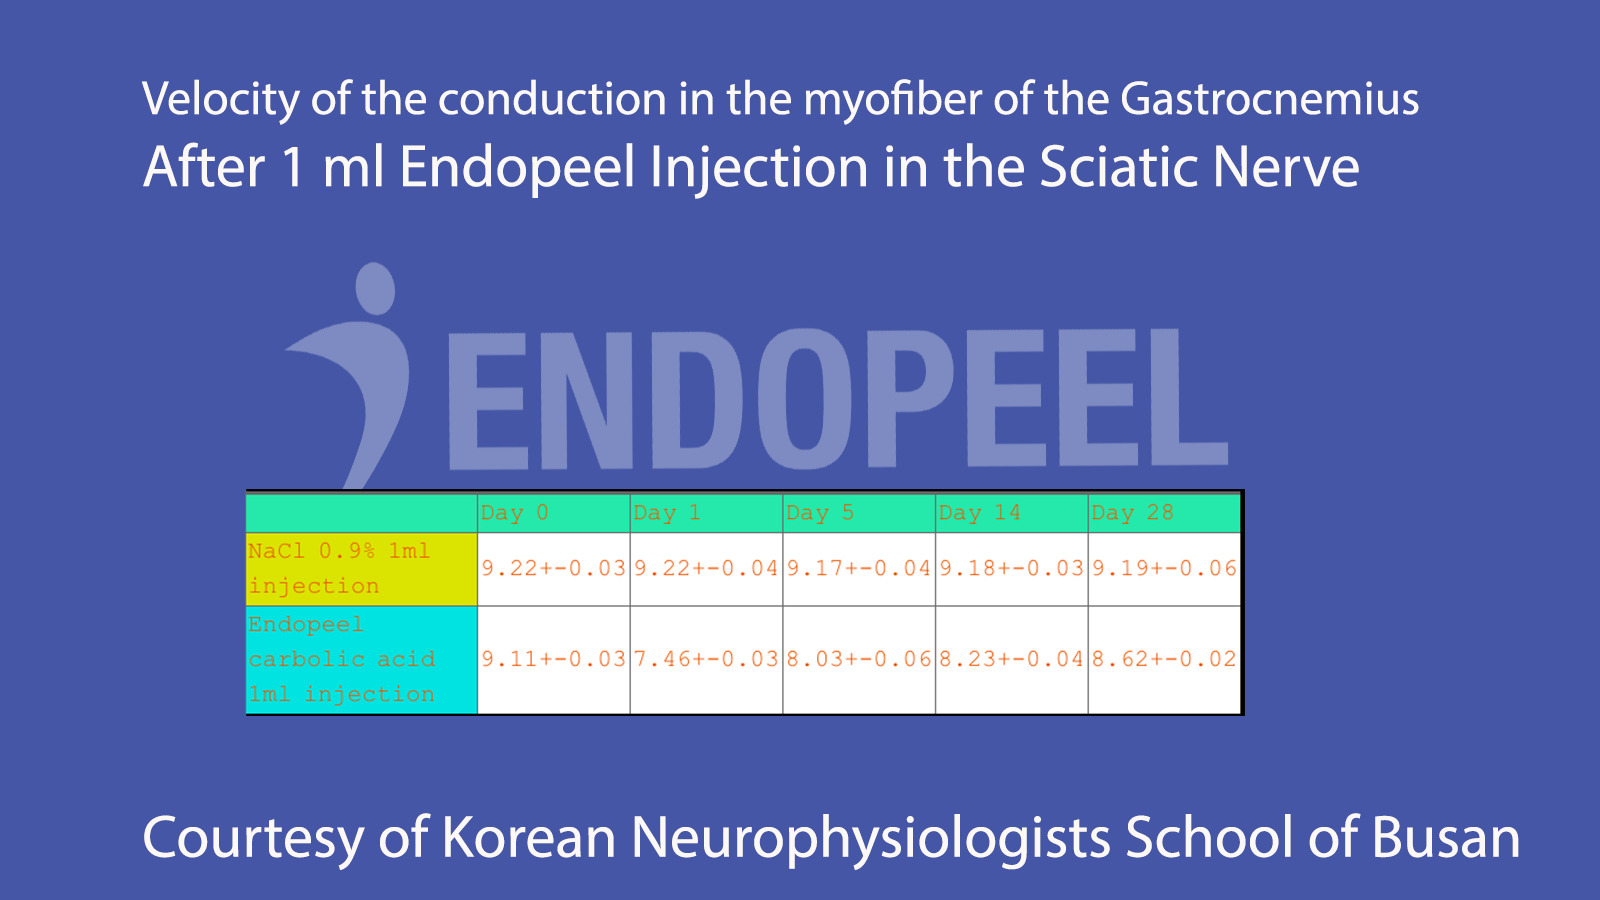 Velocity of the Conduction in the Nerve after Endopeel